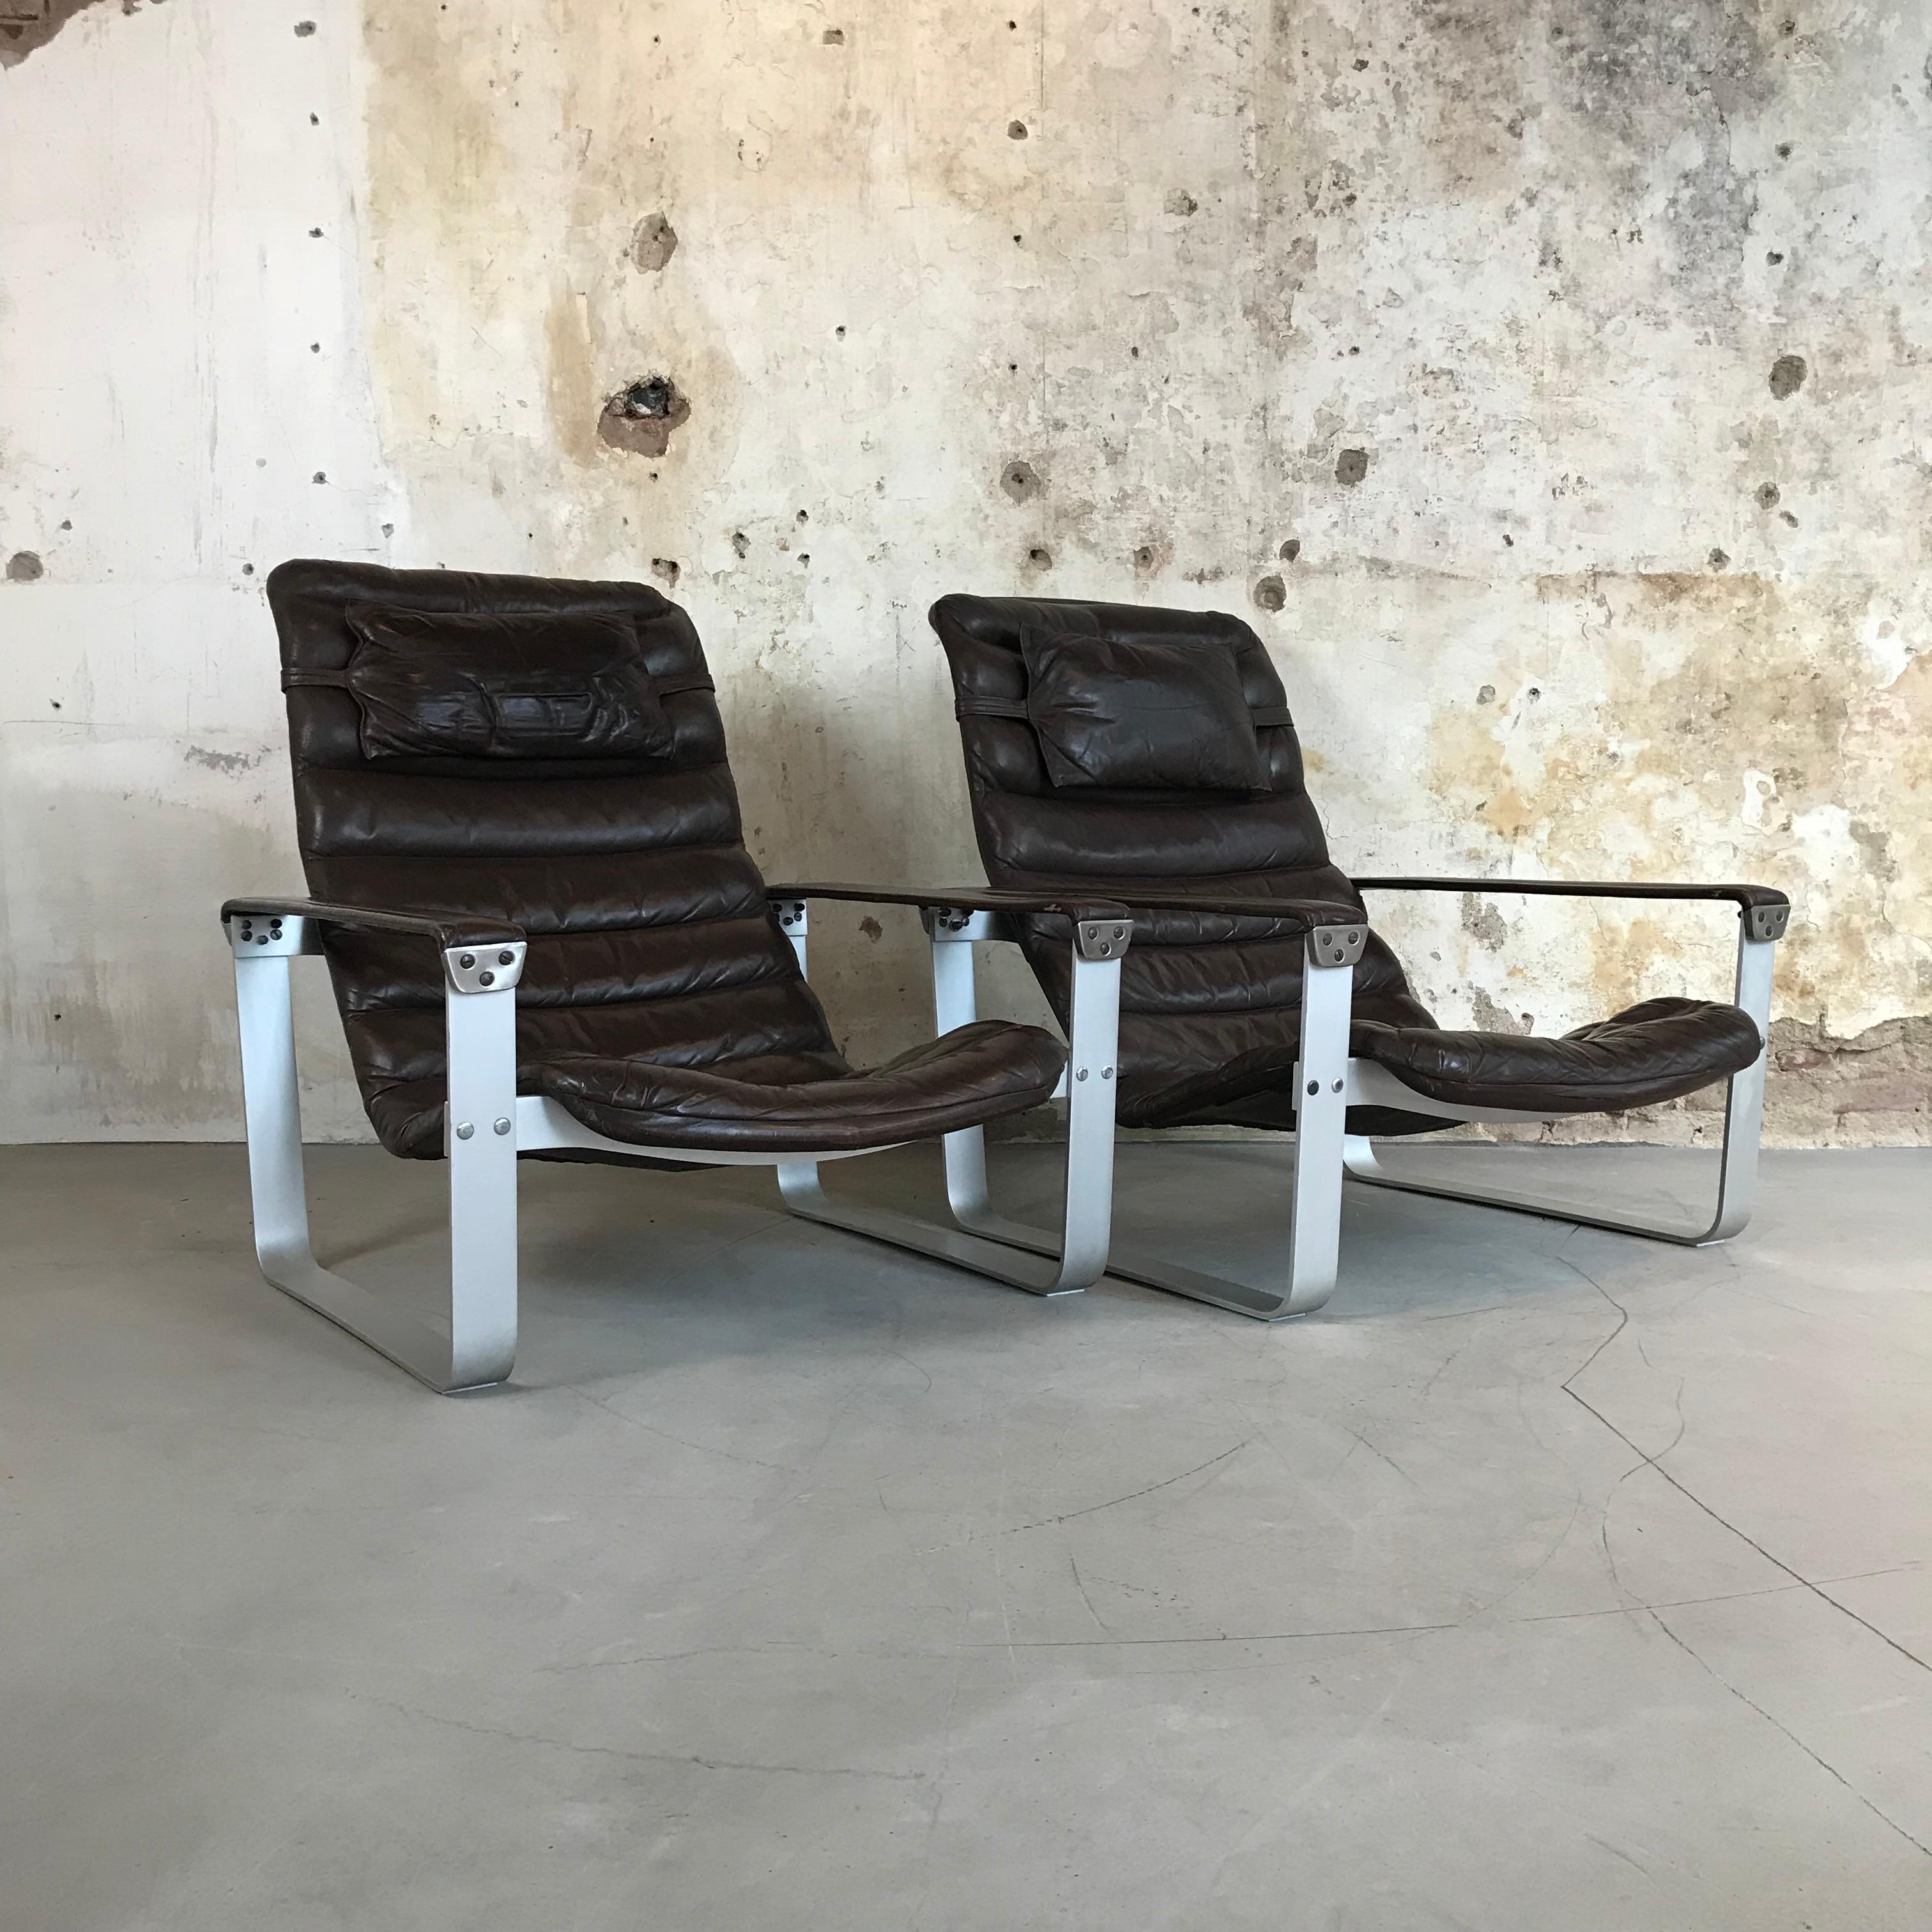 Very nice set of two comfortable low 'Pulkka' Lounge Chairs designed in 1968 by Ilmari Lappalainen and manufactured by Asko, Finland (founded in 1918). 

This chair has an anodized aluminium frame and a dark brown leather upholstered seat with